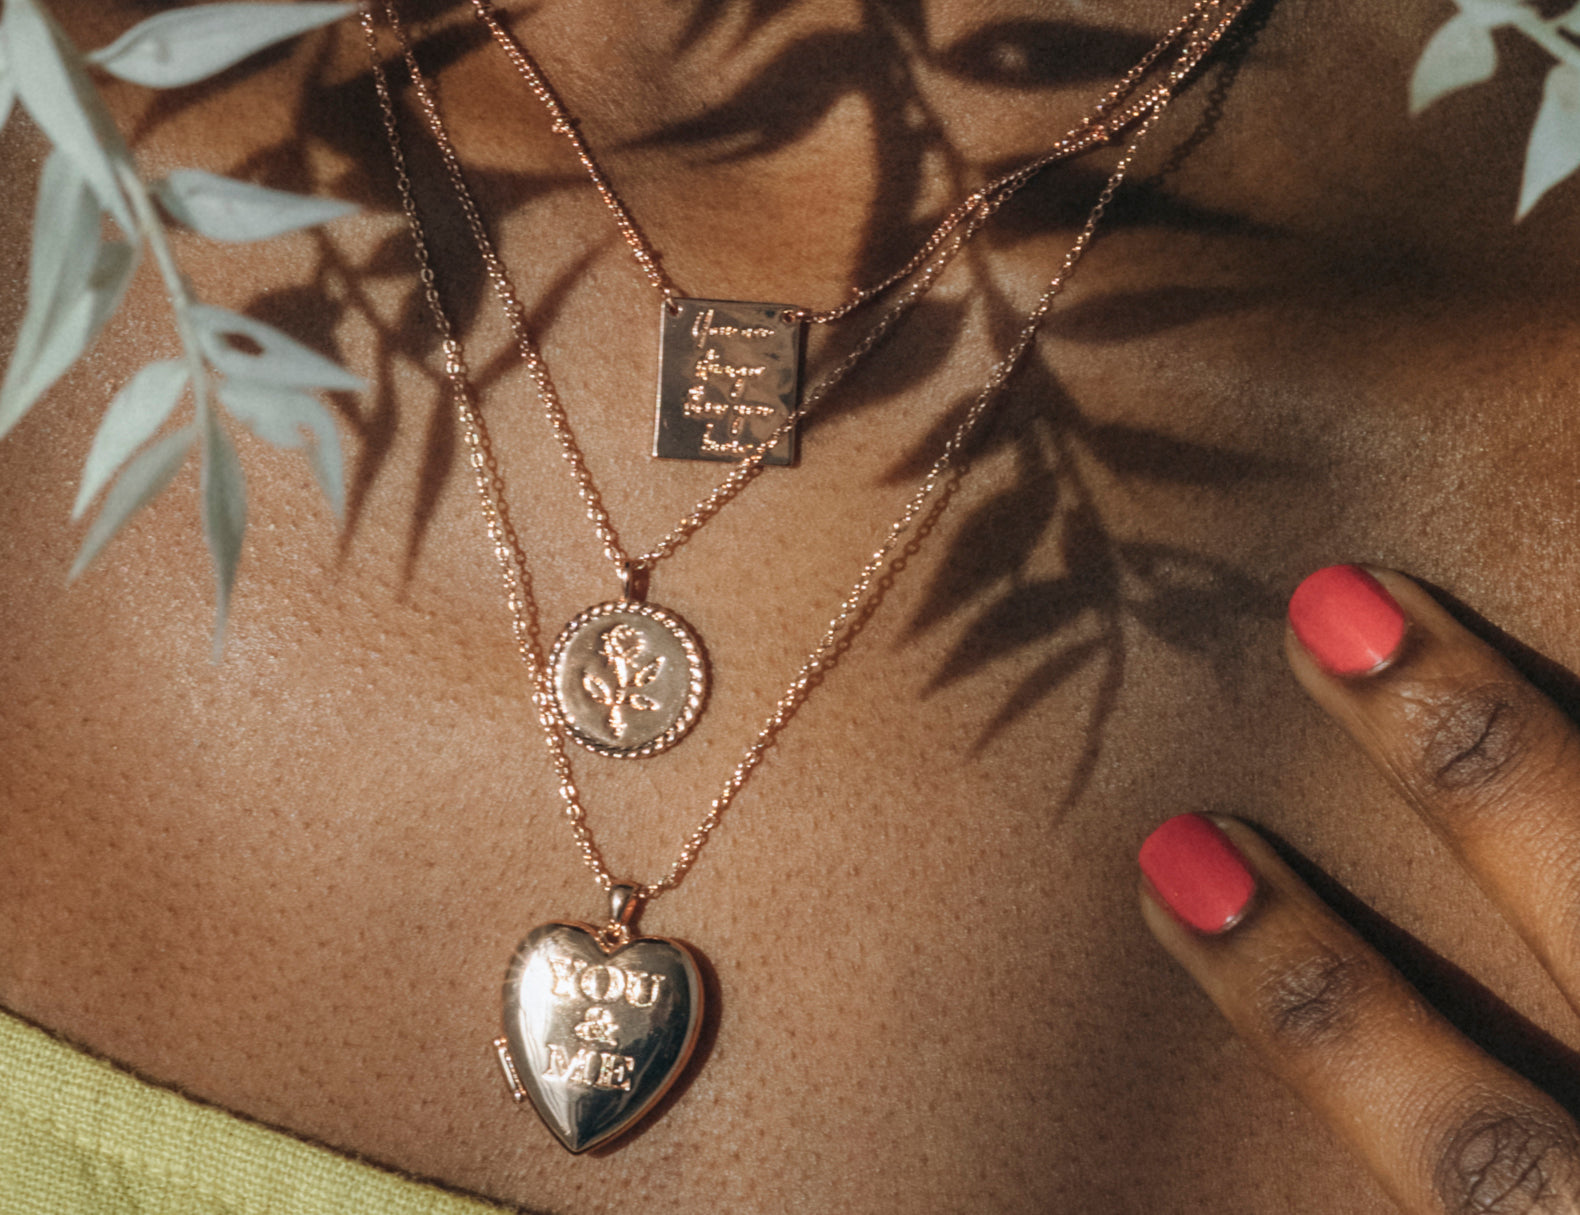 'You & Me' Heart Locket Necklace